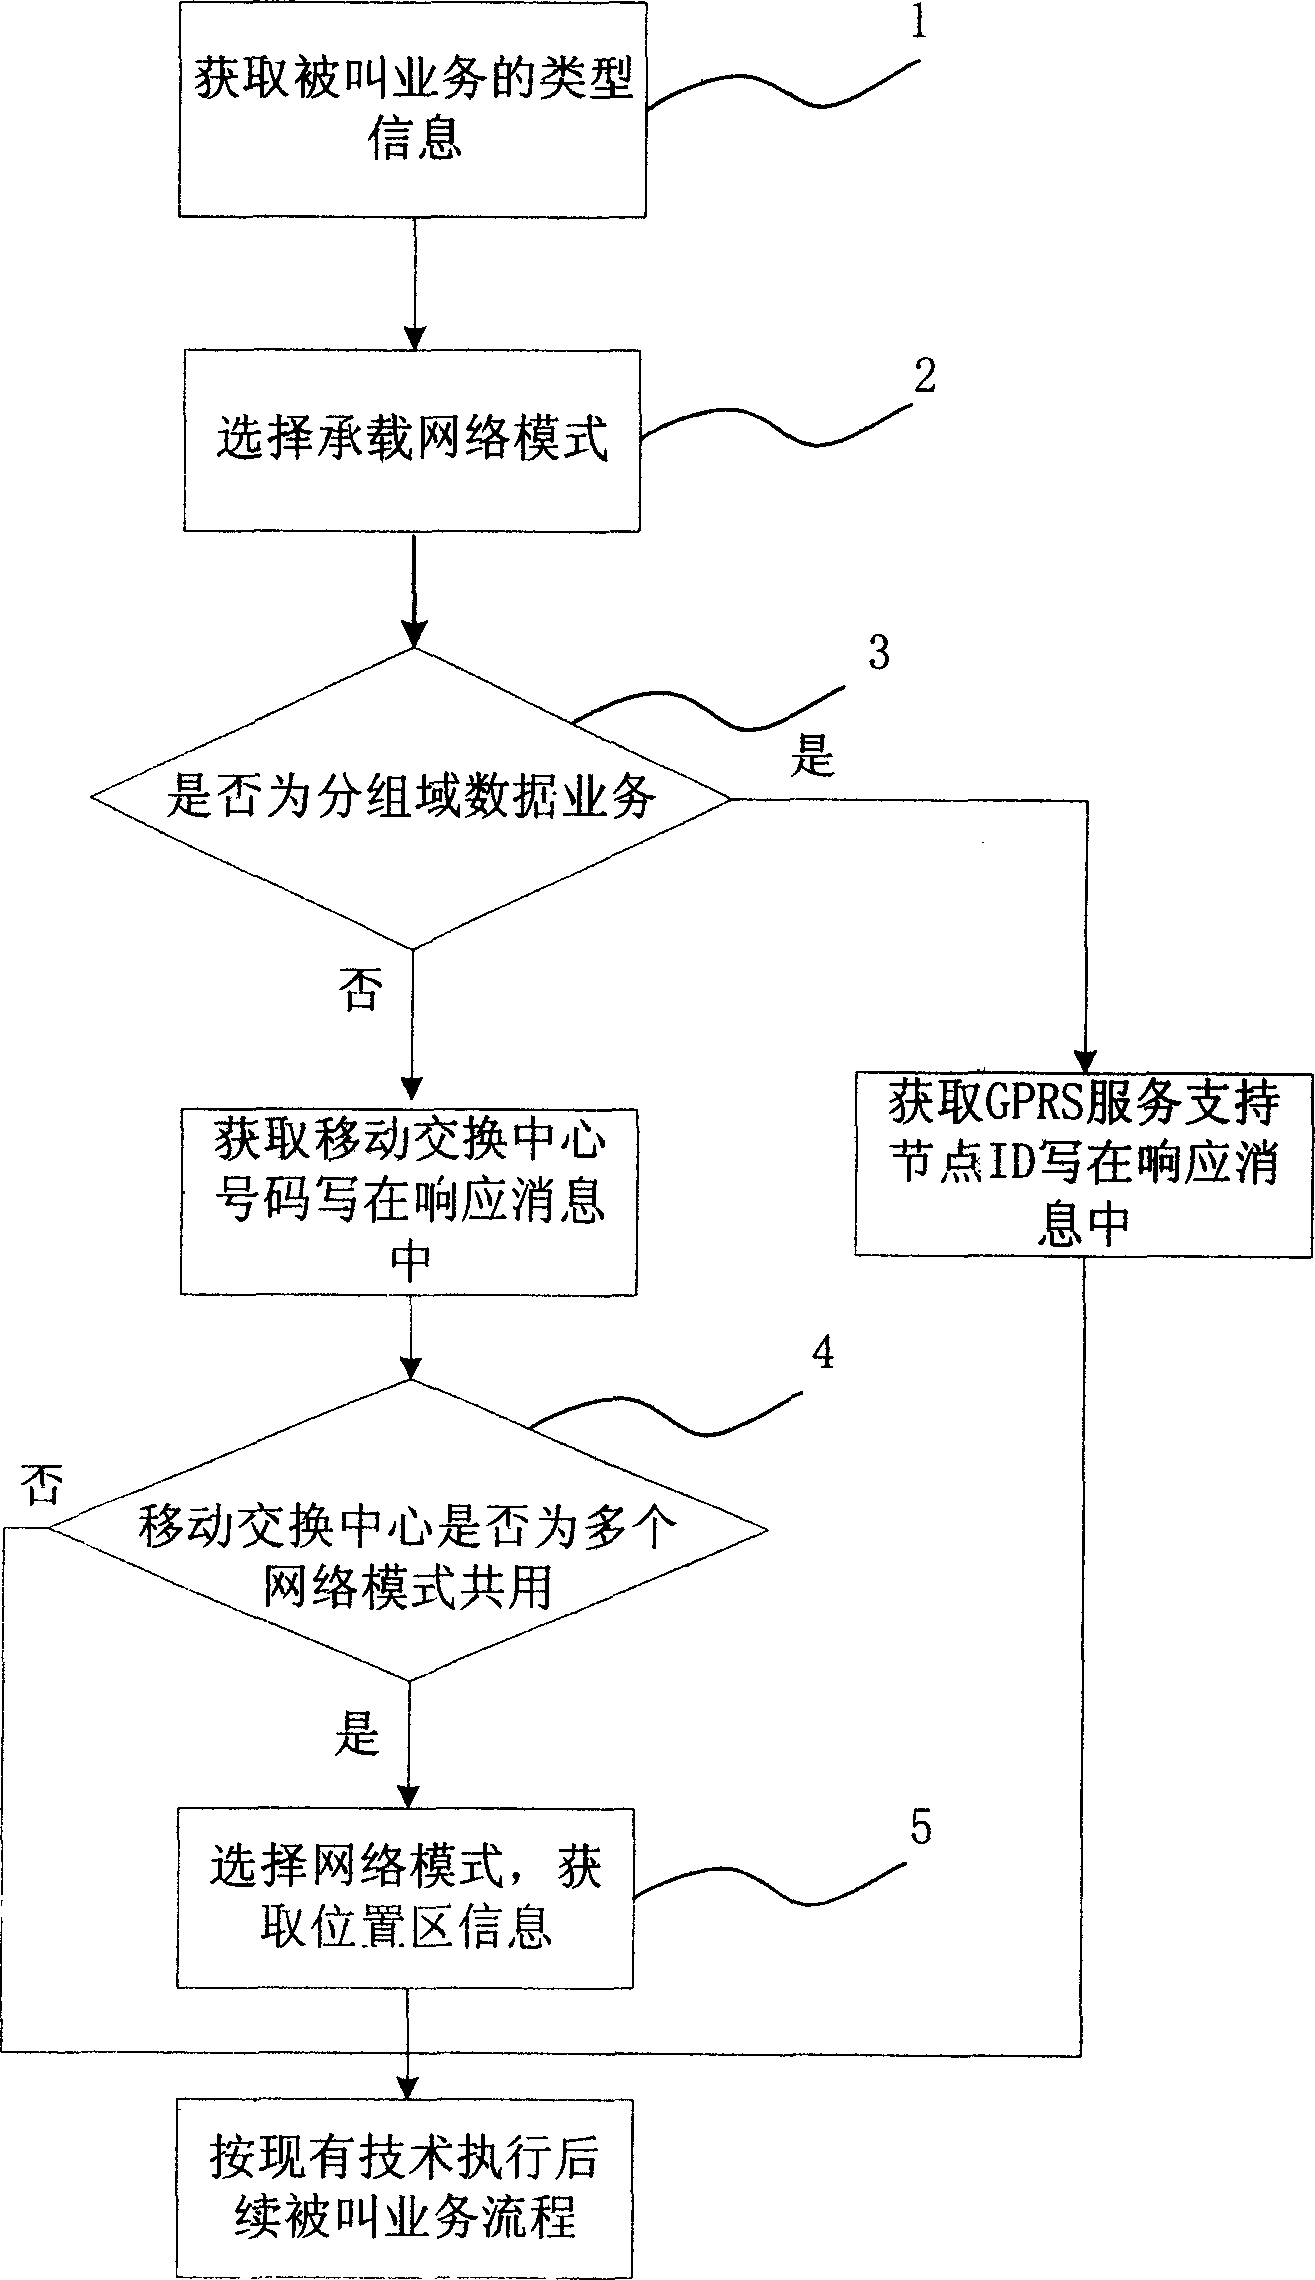 Loaded network mode selecting method for called service in mobile communication network